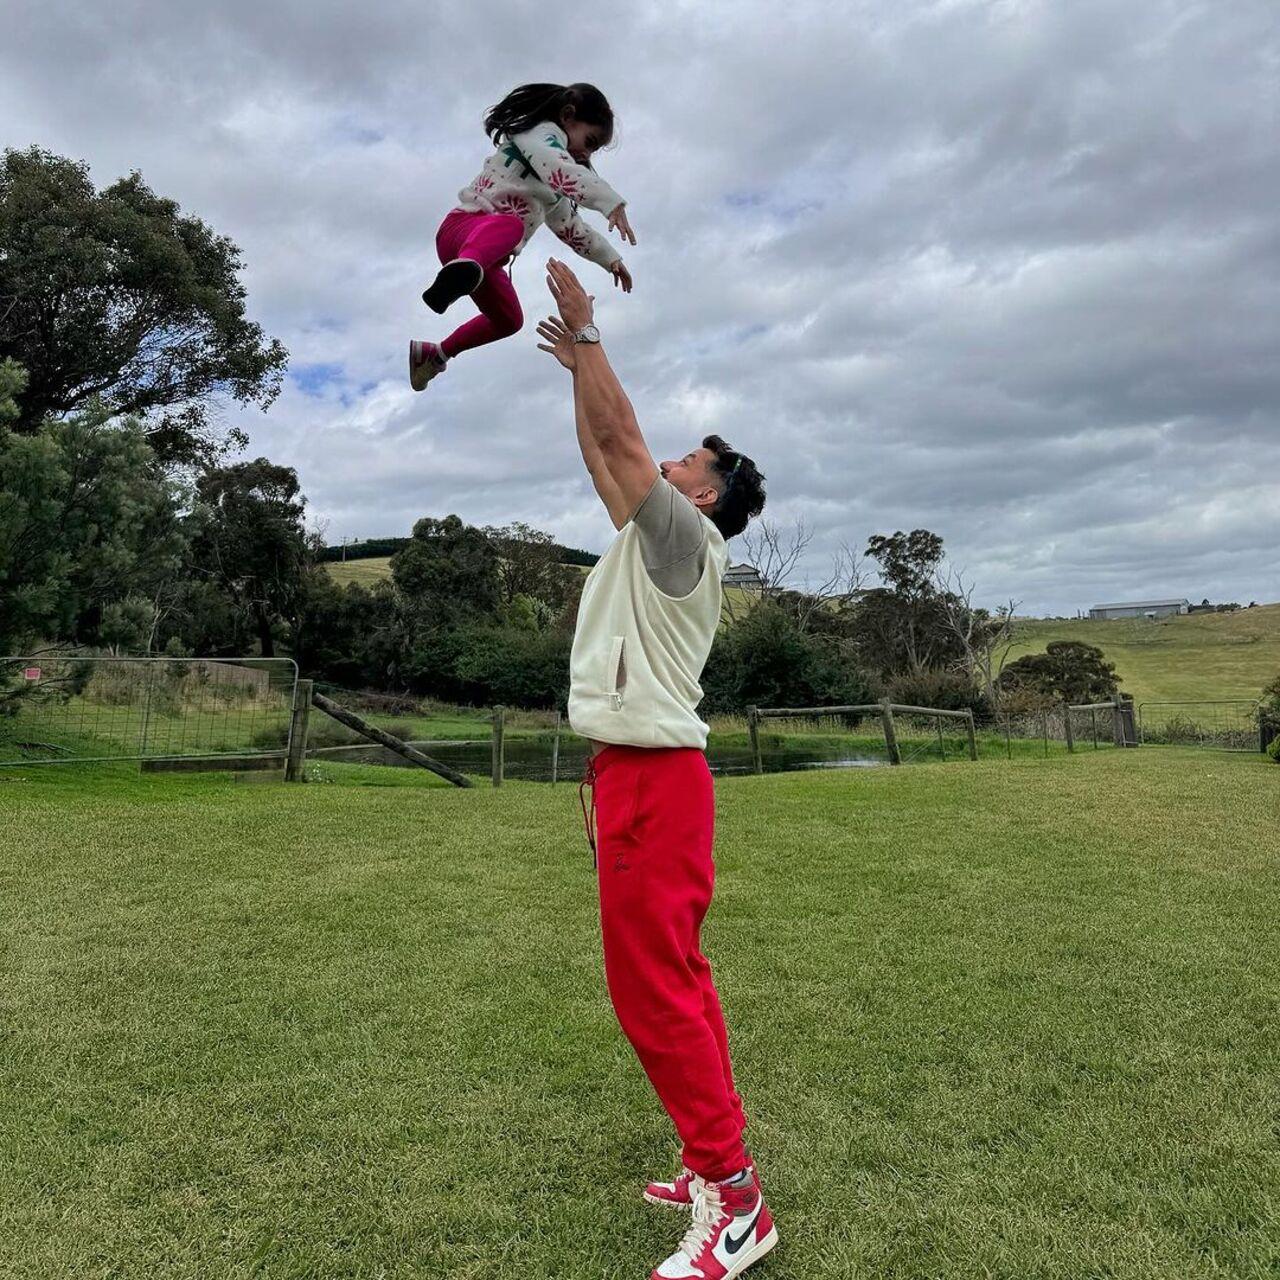 The father-daughter duo seemed to have a great time during their holiday as they got to bond. In this picture, Kunal is seen throwing Inaaya in the air before catching her. Looks like mother Soha was behind the camera capturing the moment of happiness on camera forever